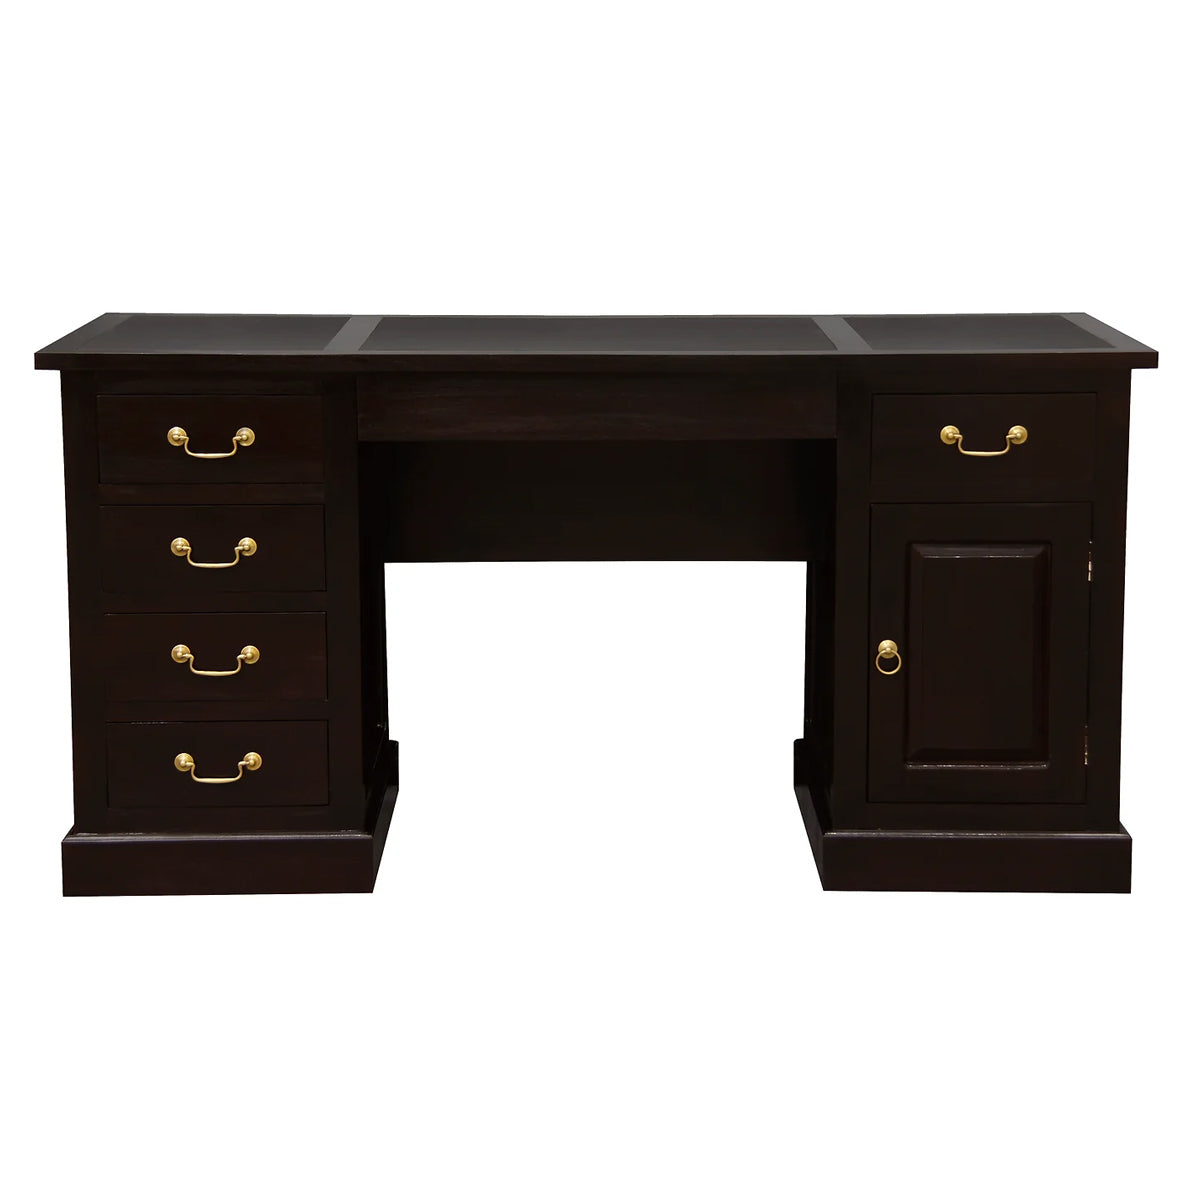 Tasmania Timber Desk with Faux Leather Top - Chocolate - Notbrand